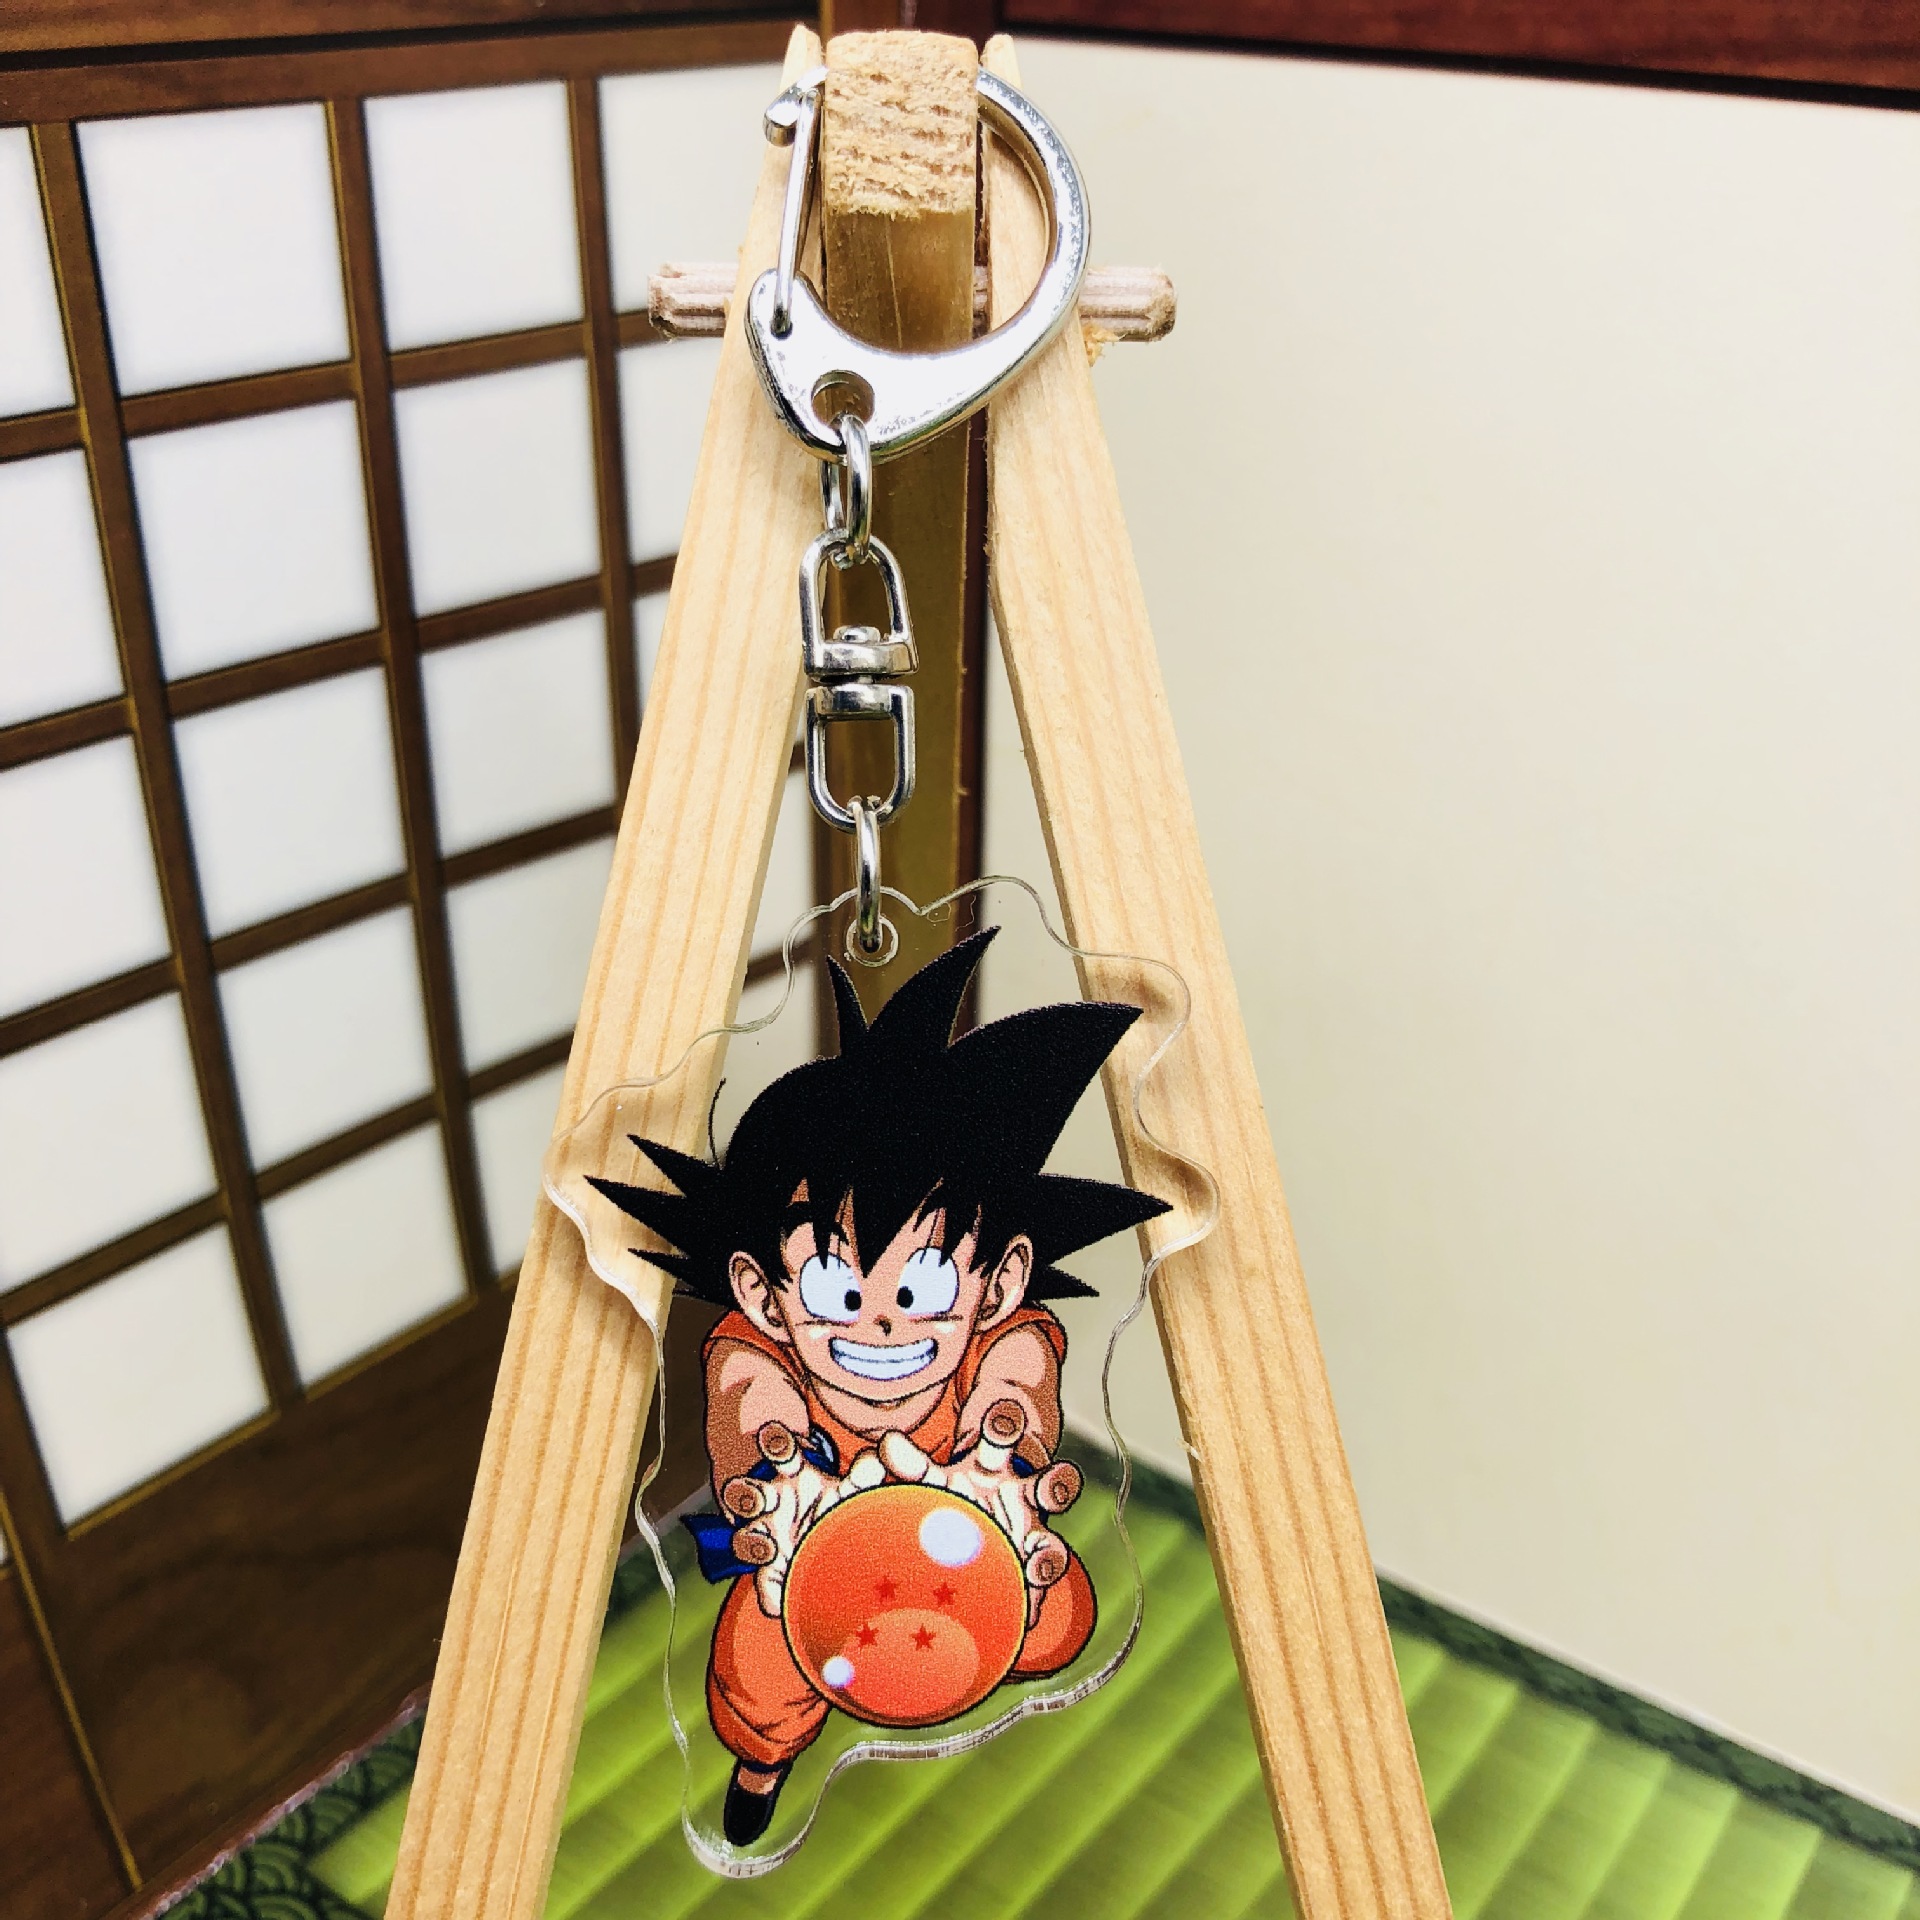 Dragon Ball – All Badass Characters Themed Acrylic Keychains (30 Designs) Keychains